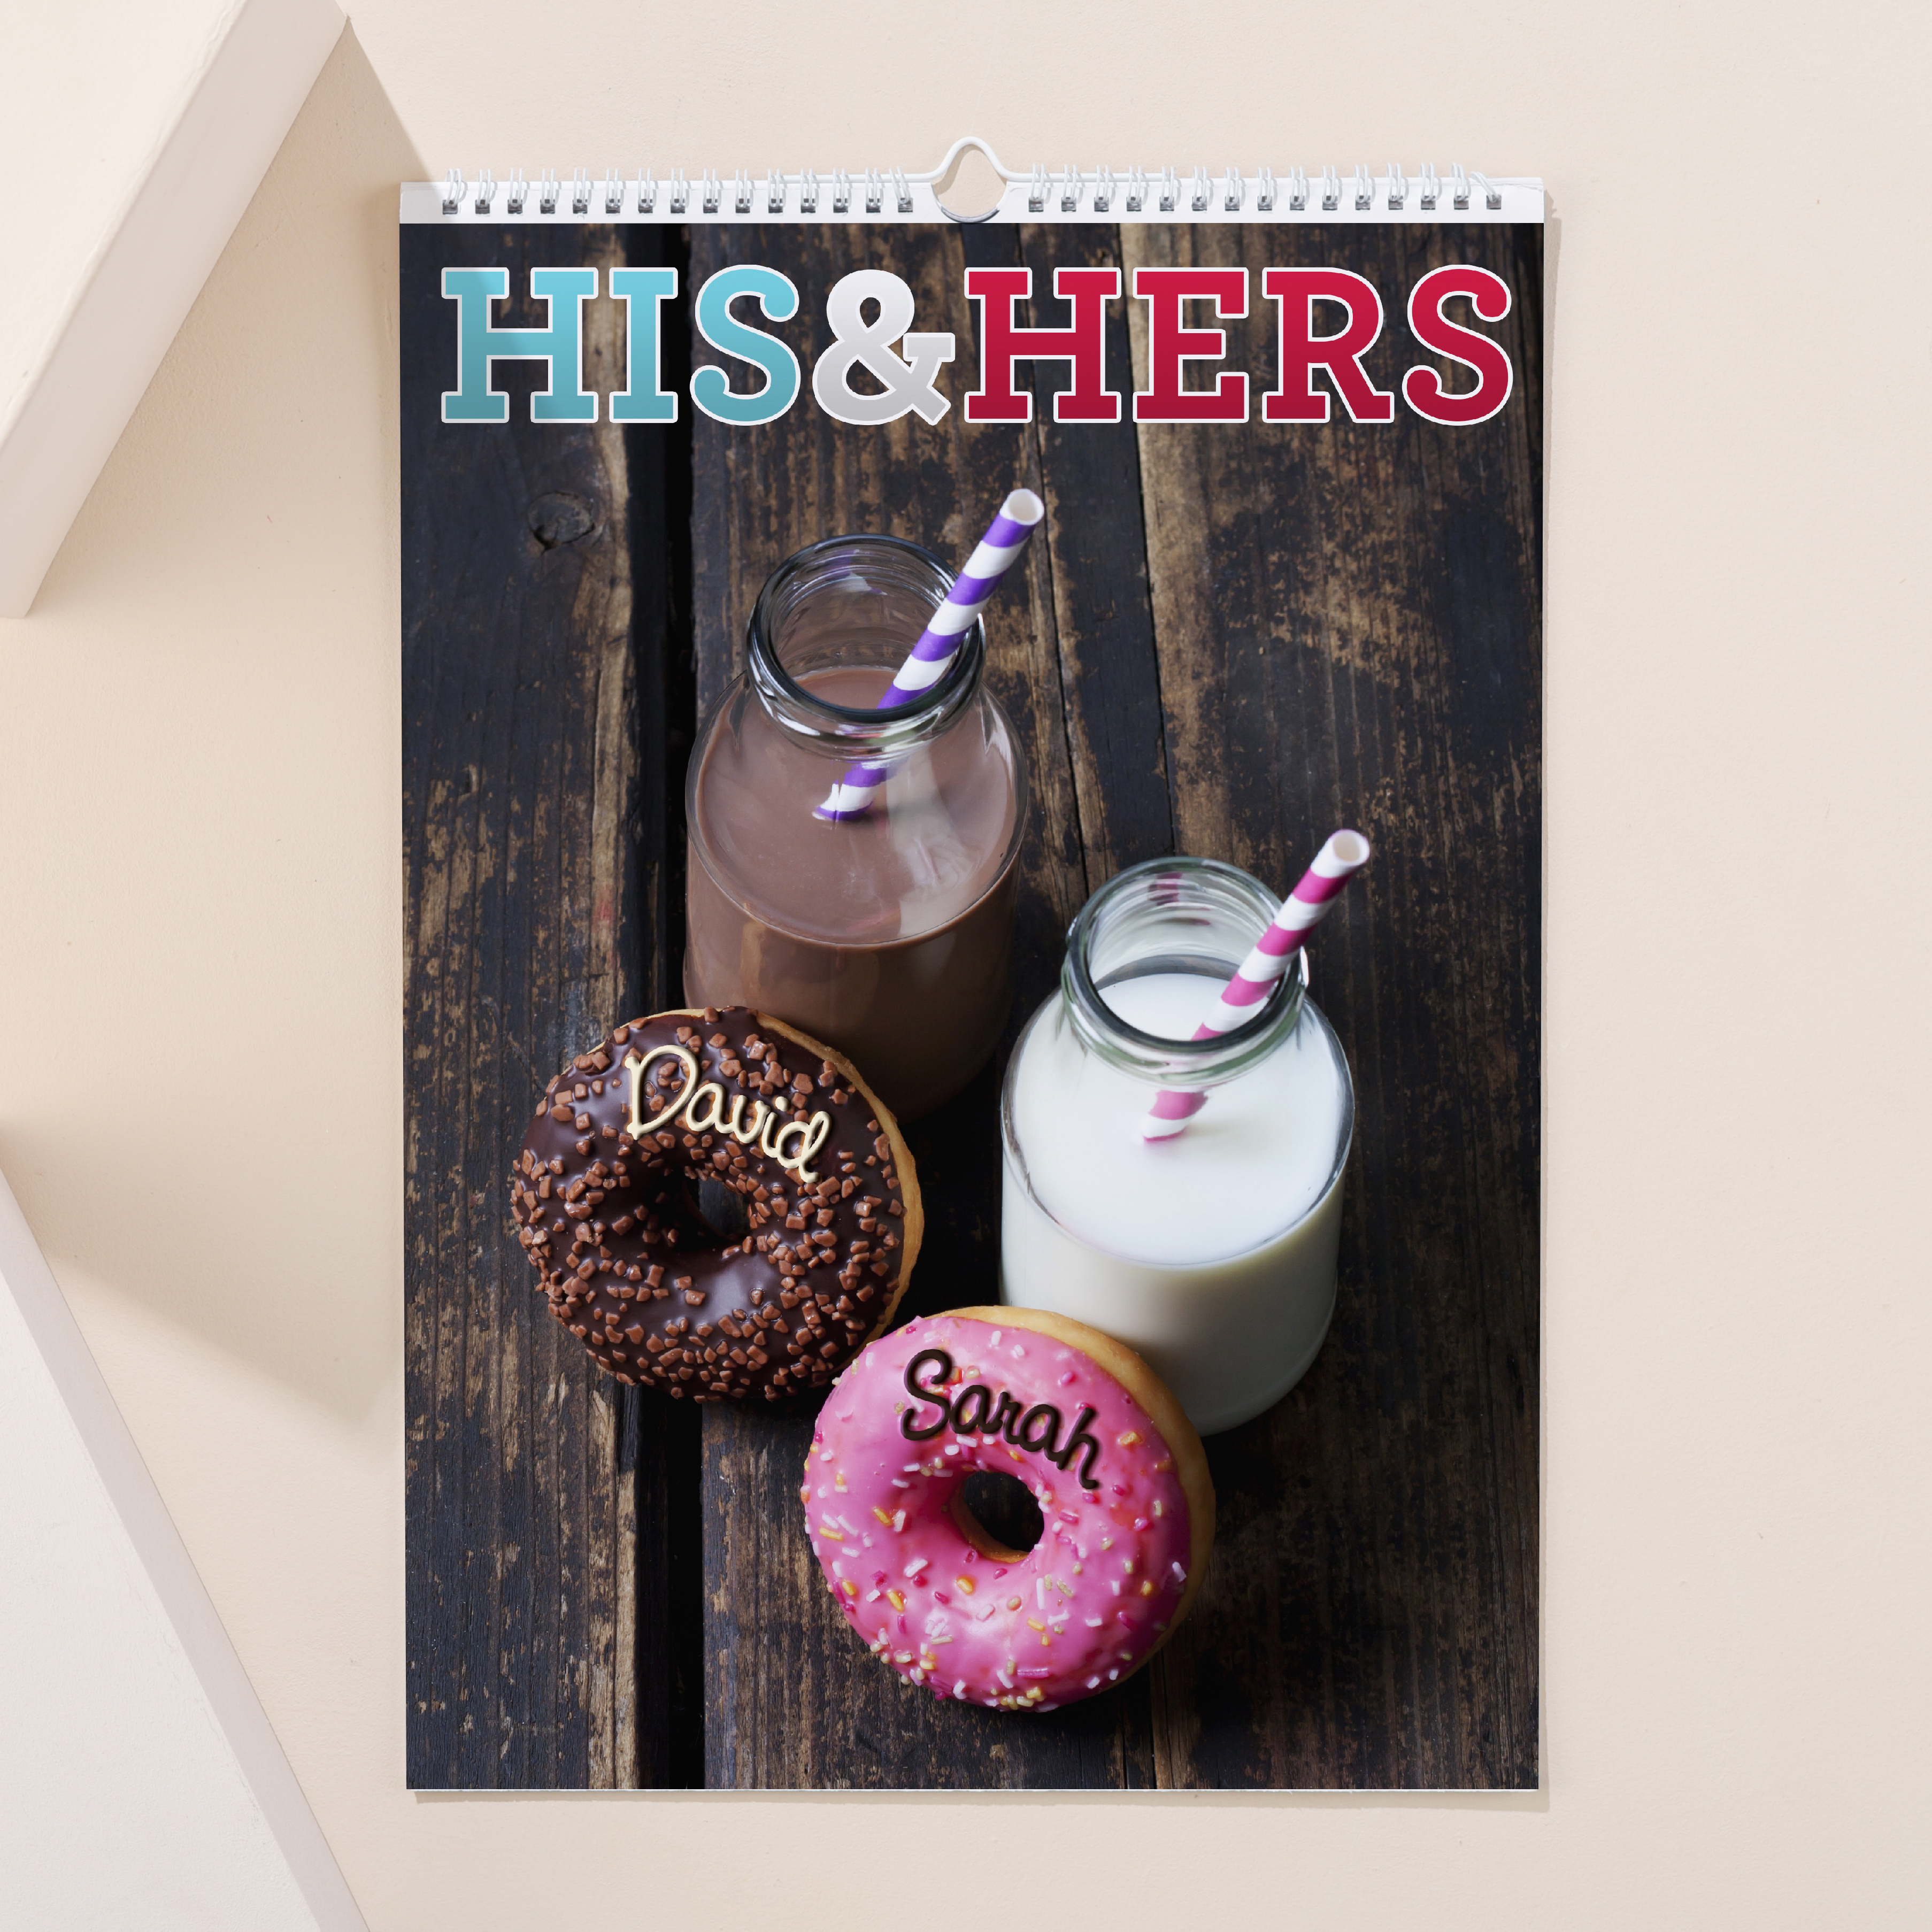 Personalised His and Hers Planner Calendar - 7th Edition